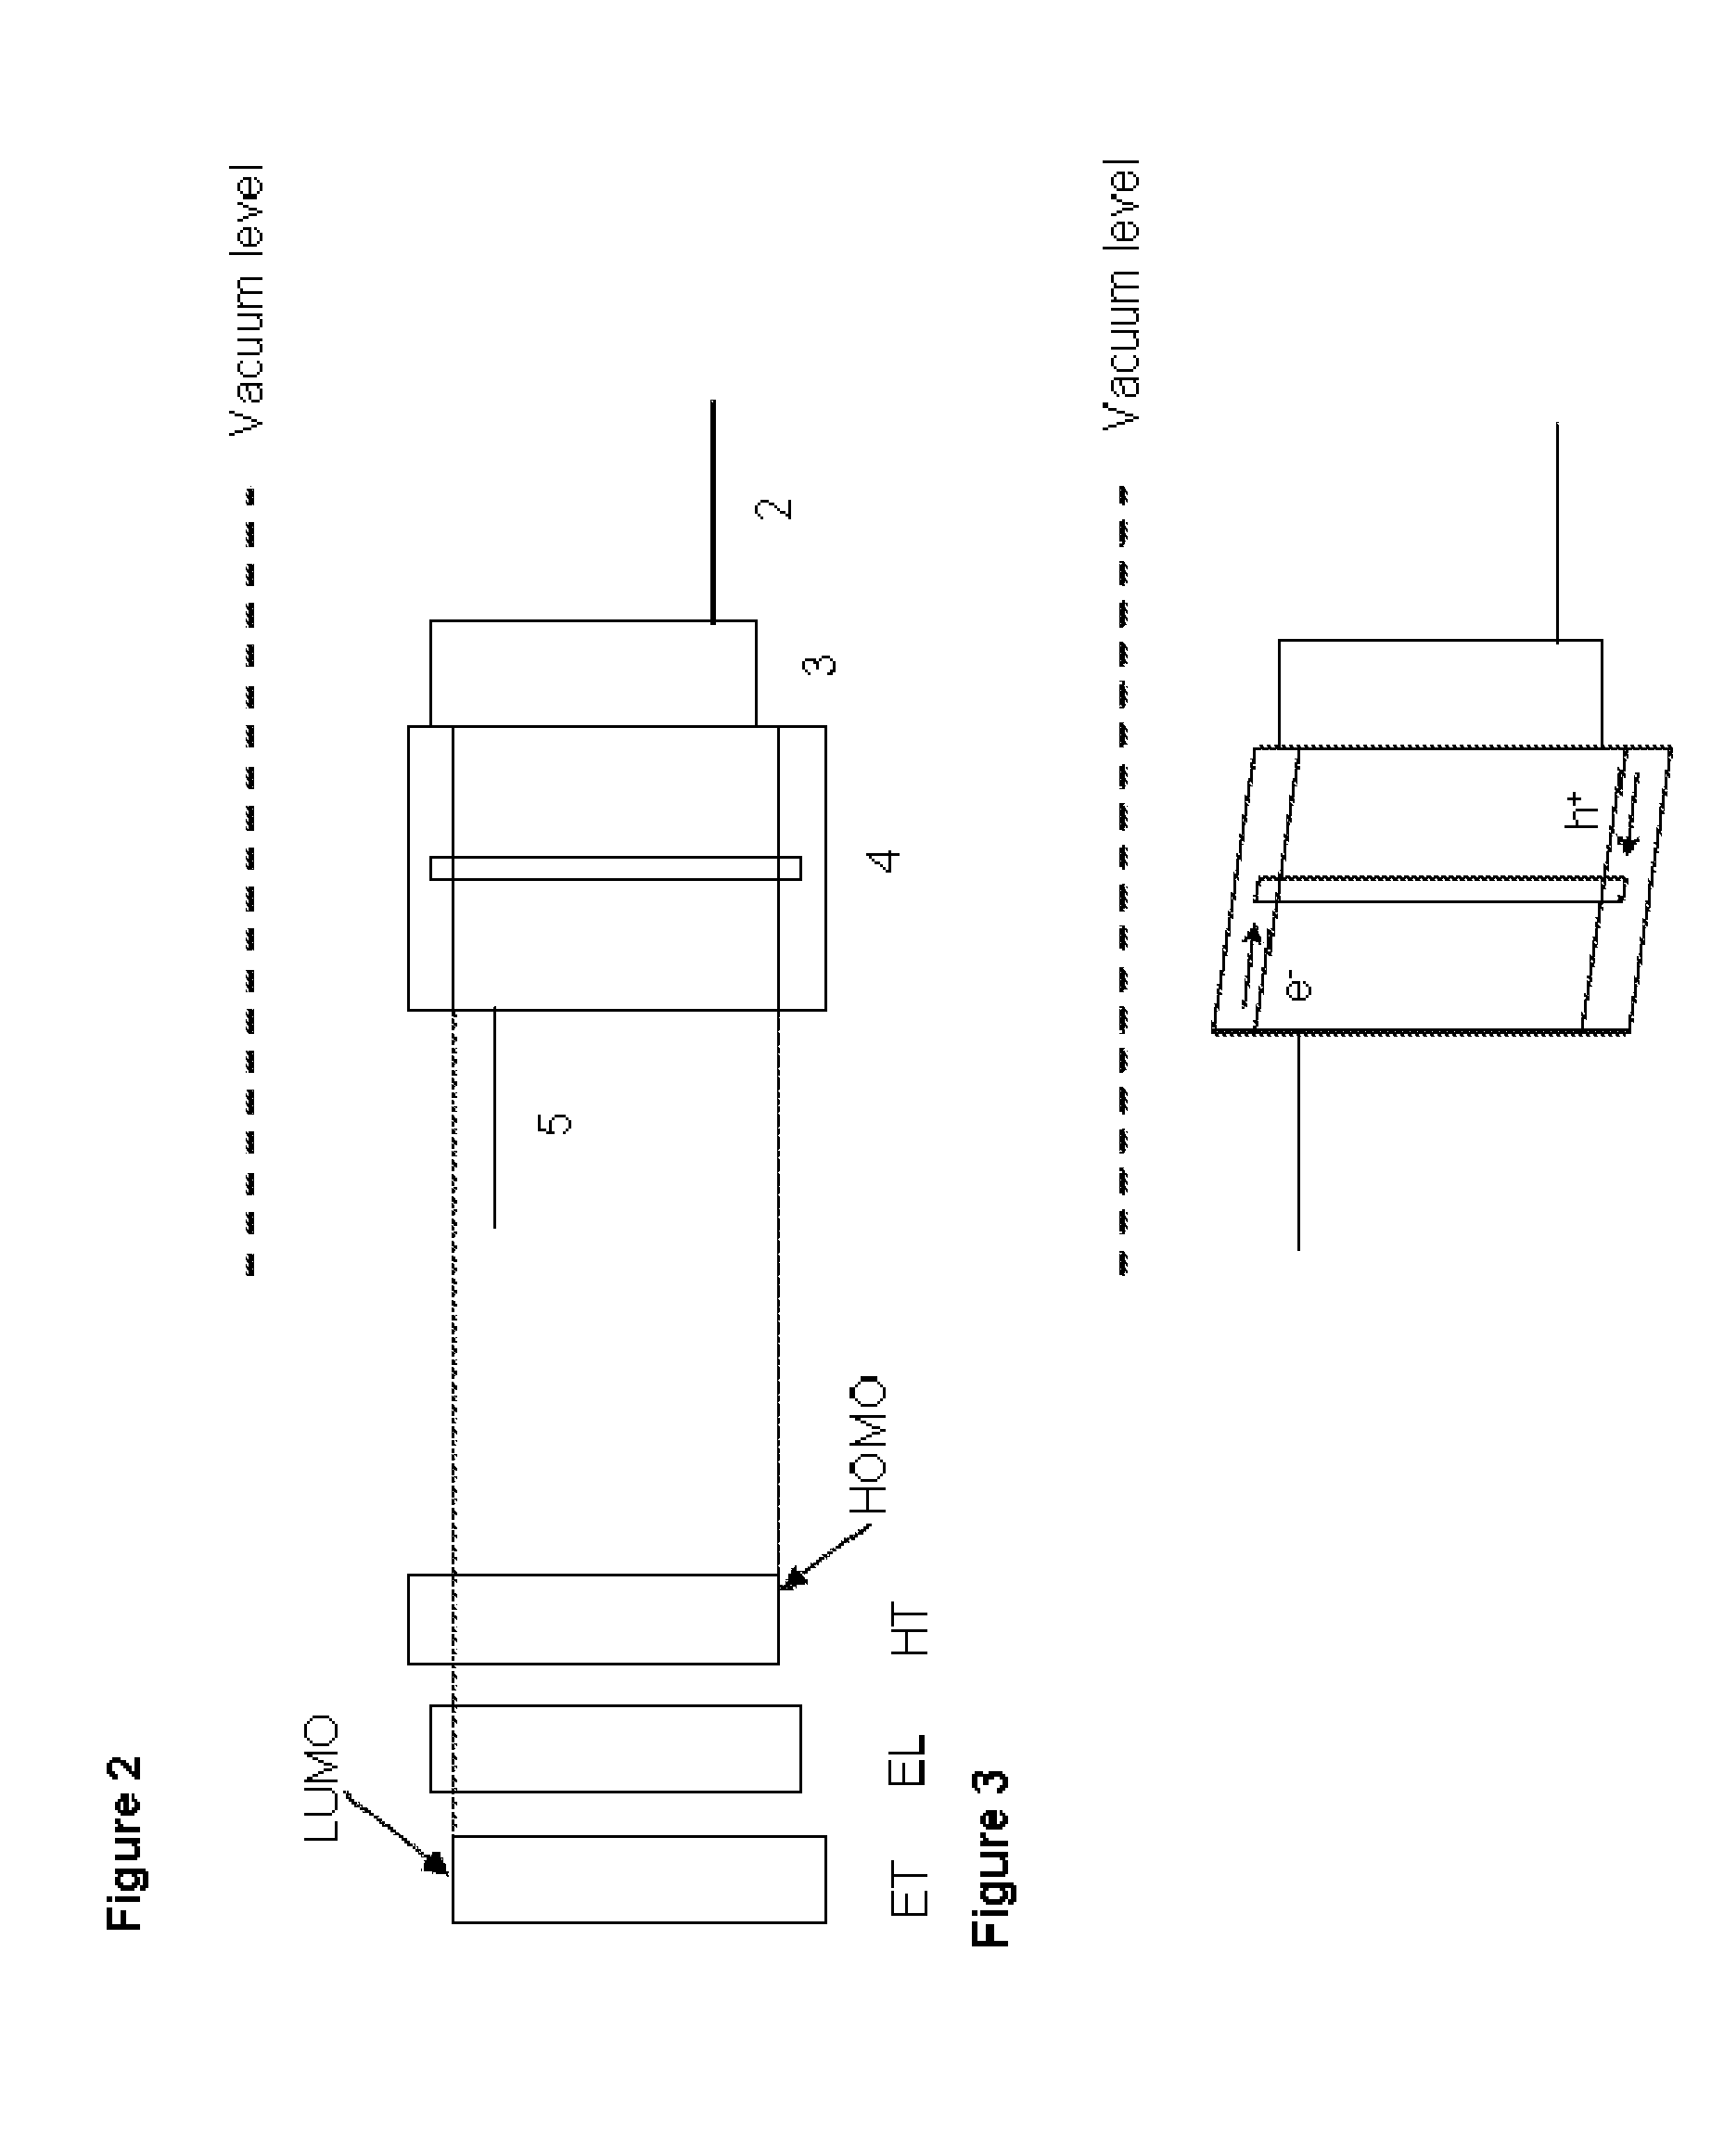 Organic Electroluminescent Device and Method of Fabrication